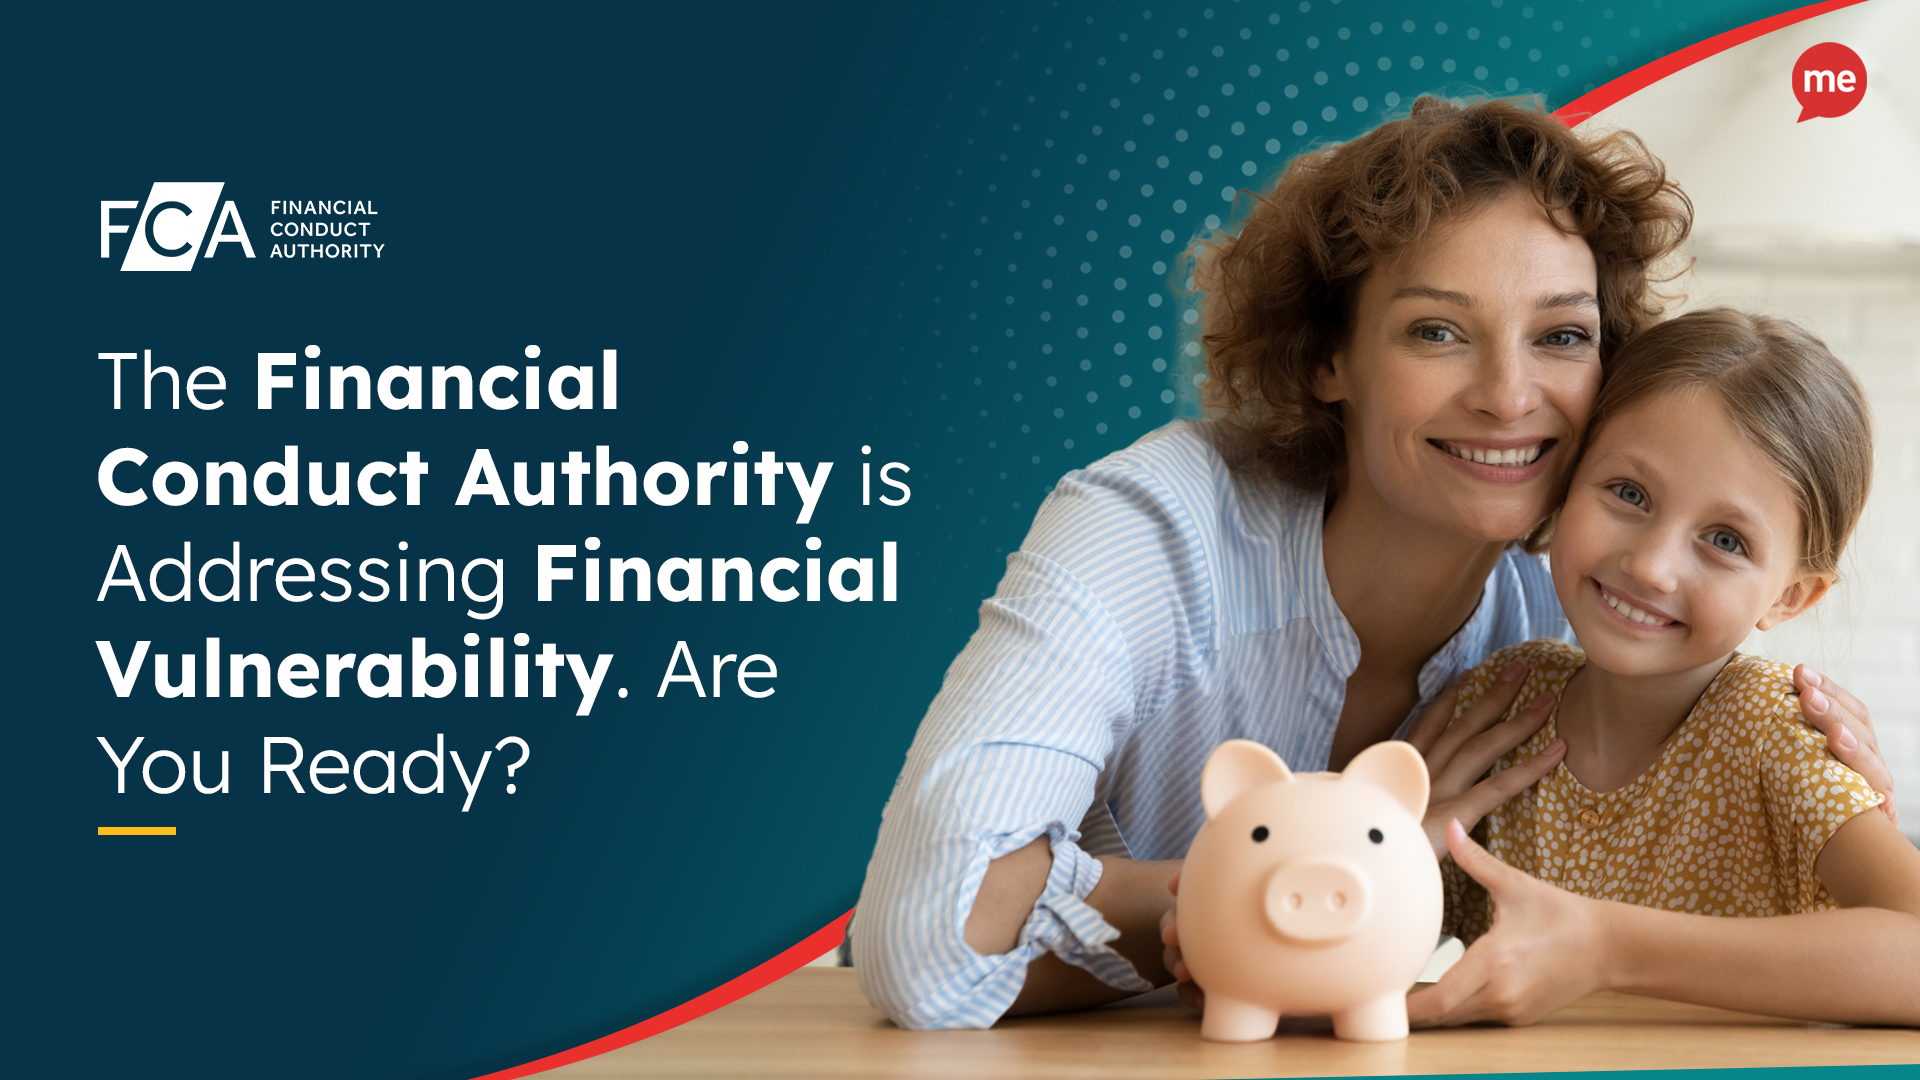 The Financial Conduct Authority is Addressing Financial Vulnerability. Are You Ready?